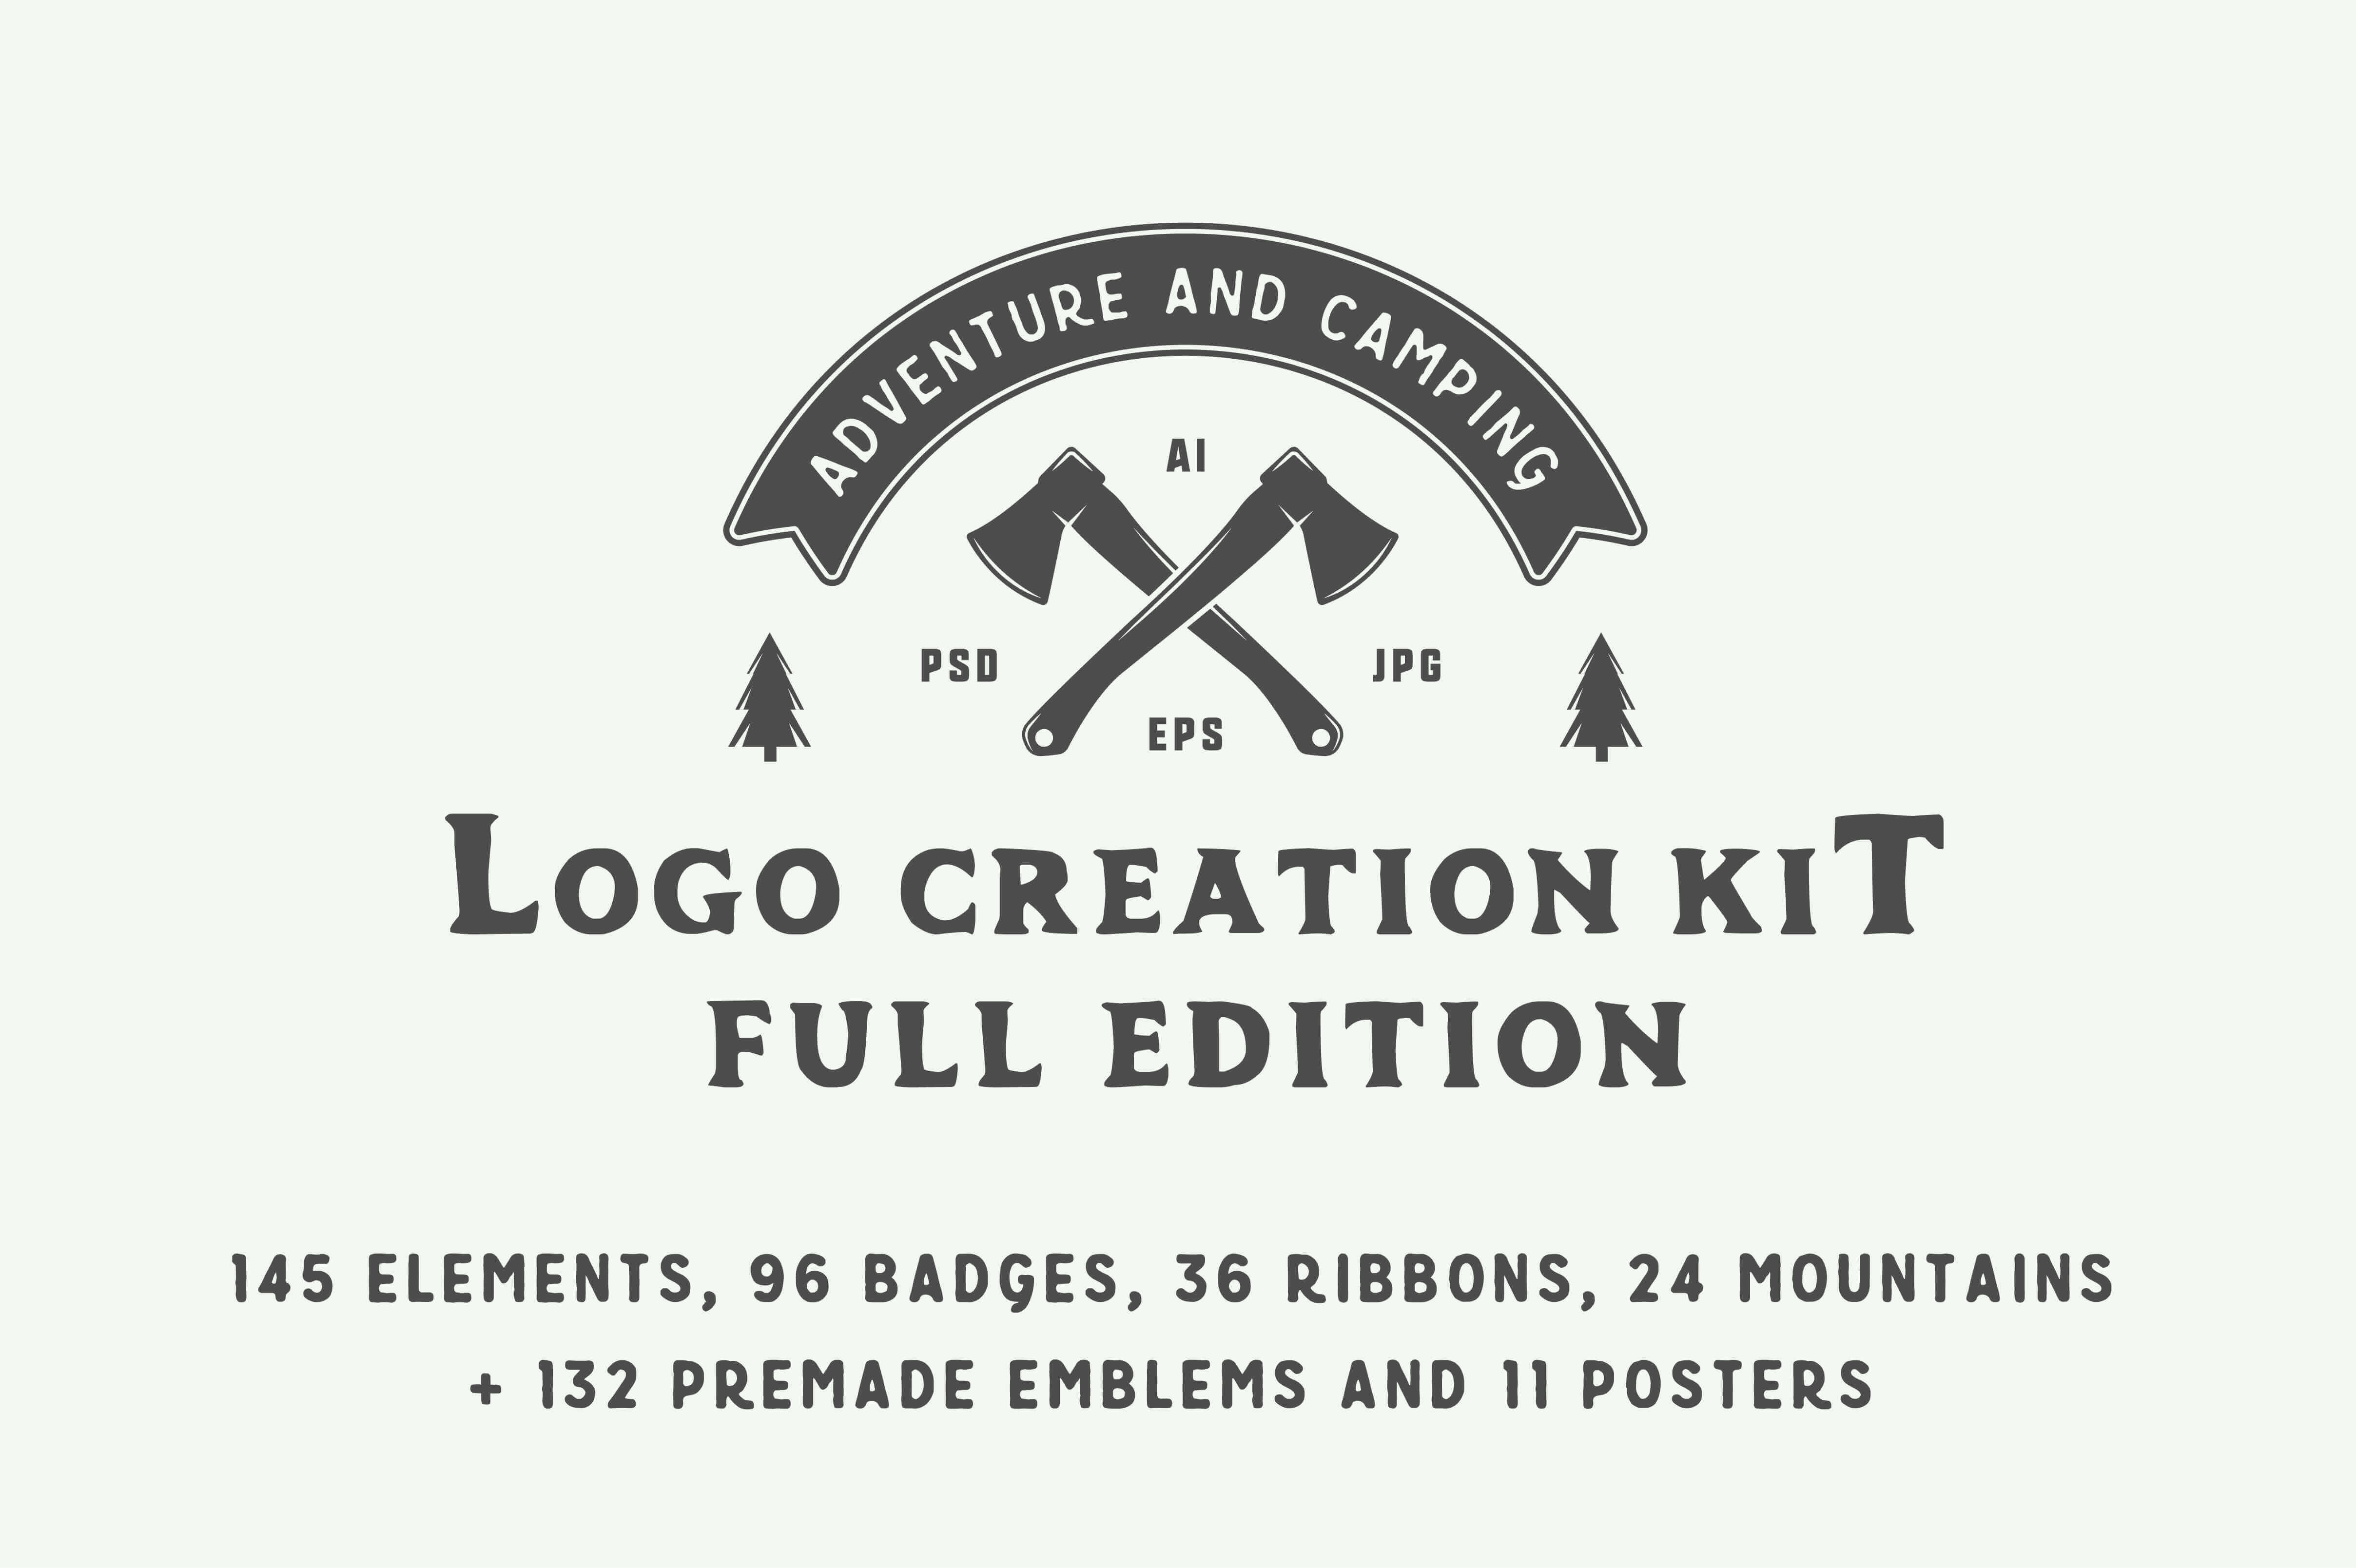 Only Logo - Adventure and Camping Logo Creation Kit $14!